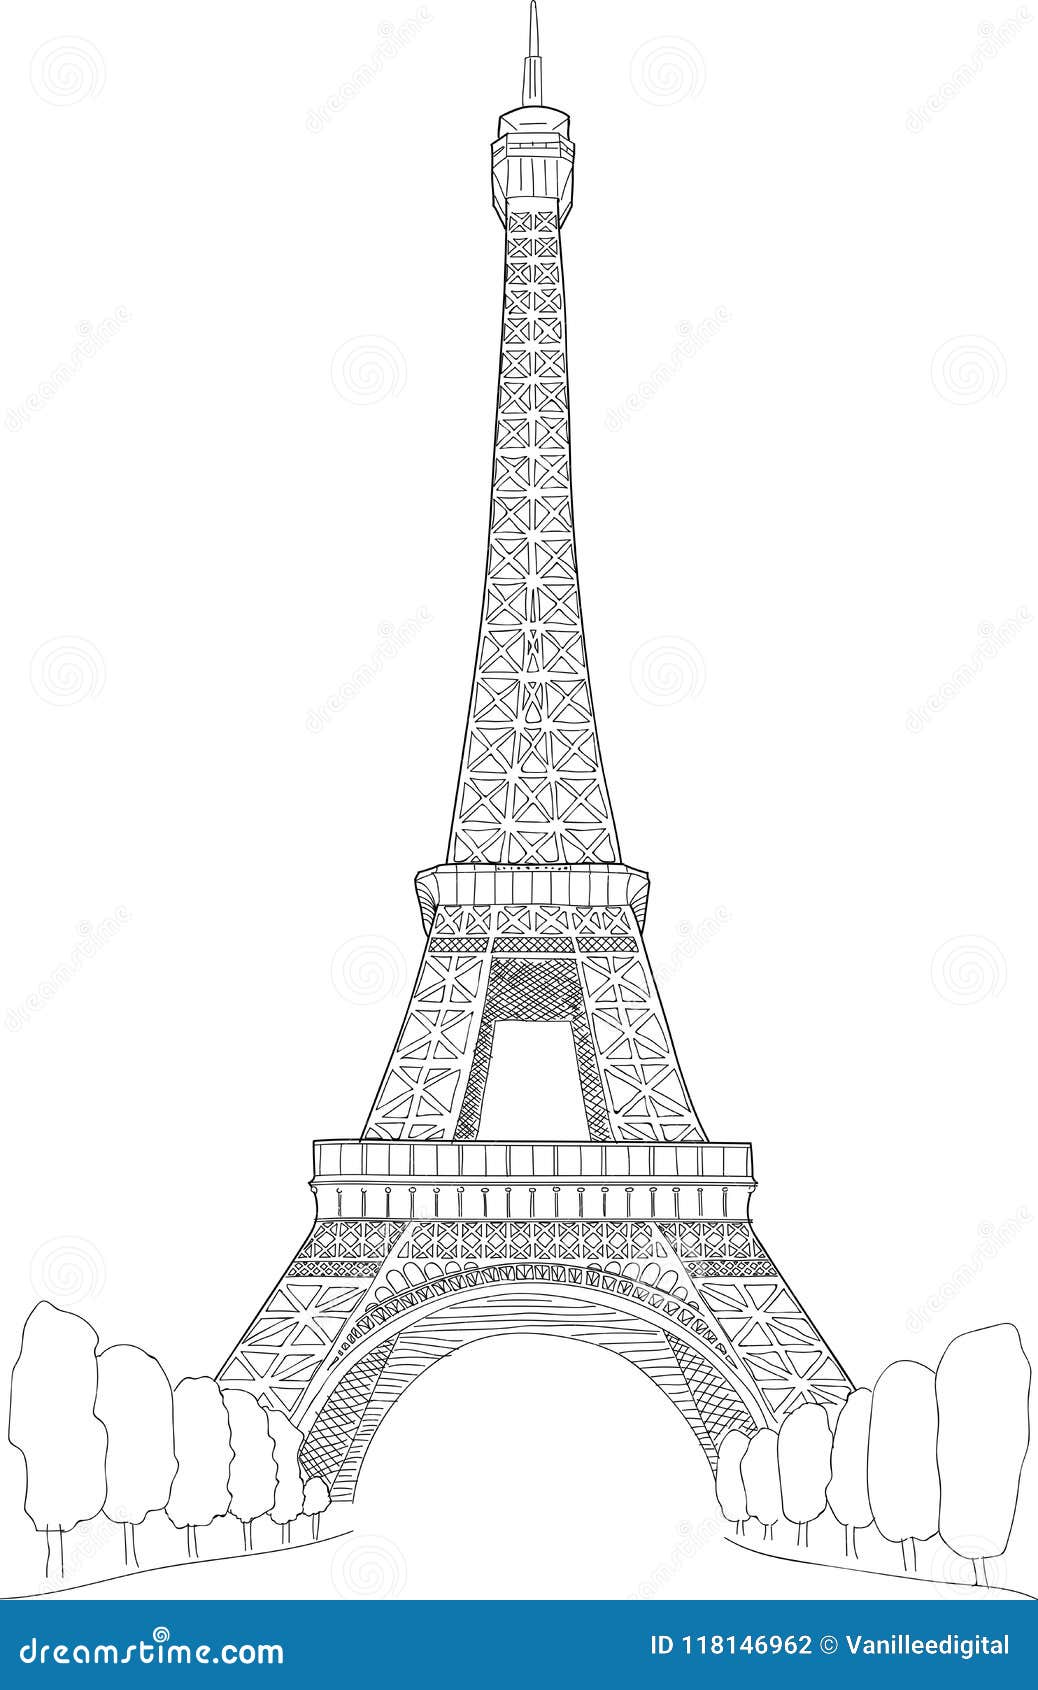 Eiffel Tower Free Hand Drawing Sketch, France Paris Famous Building